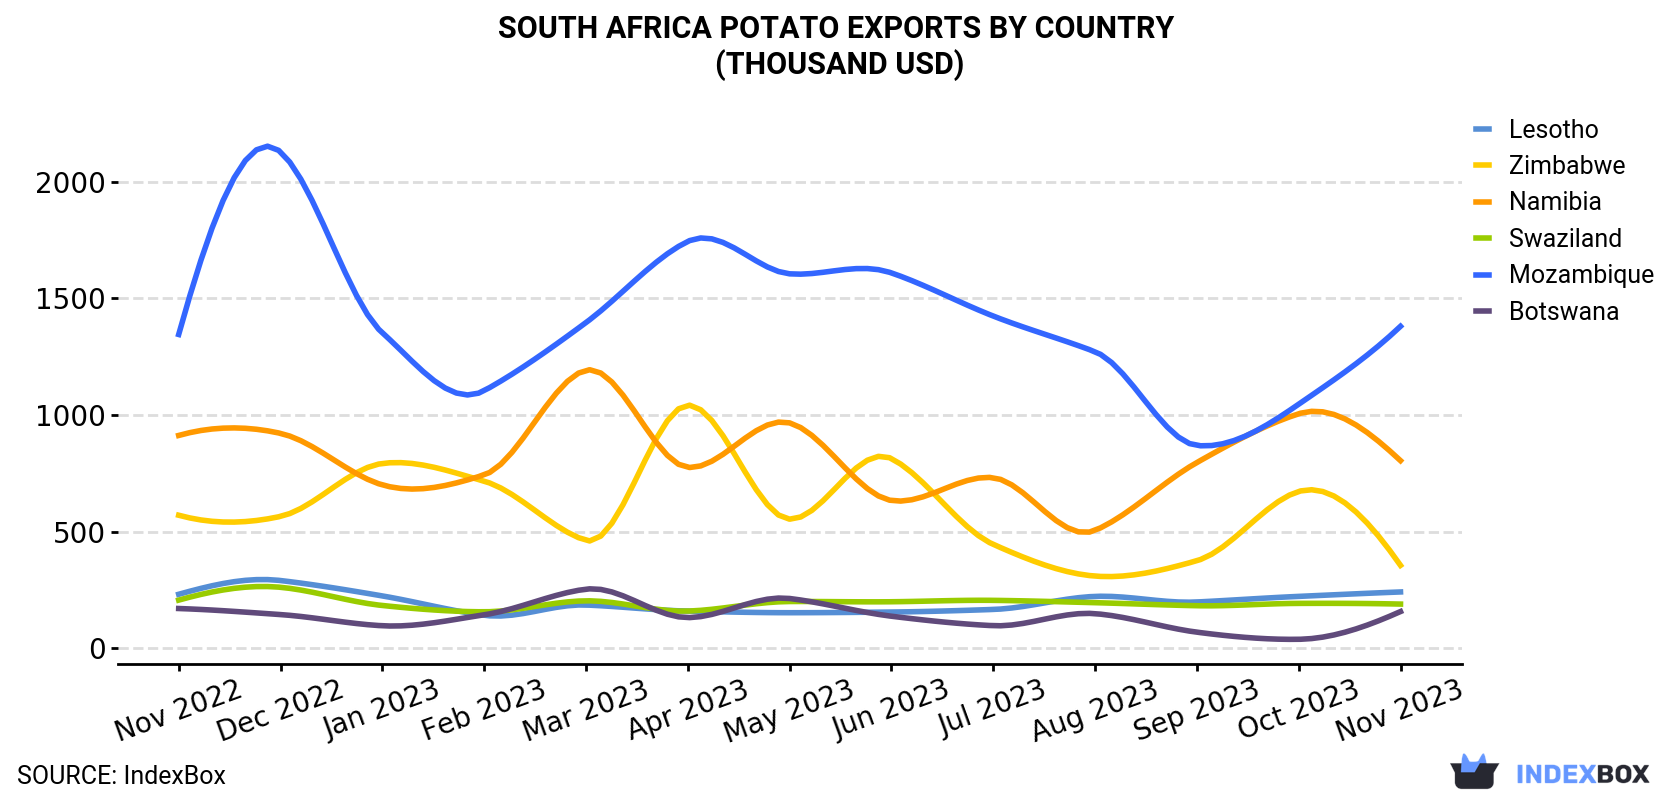 South Africa Potato Exports By Country (Thousand USD)